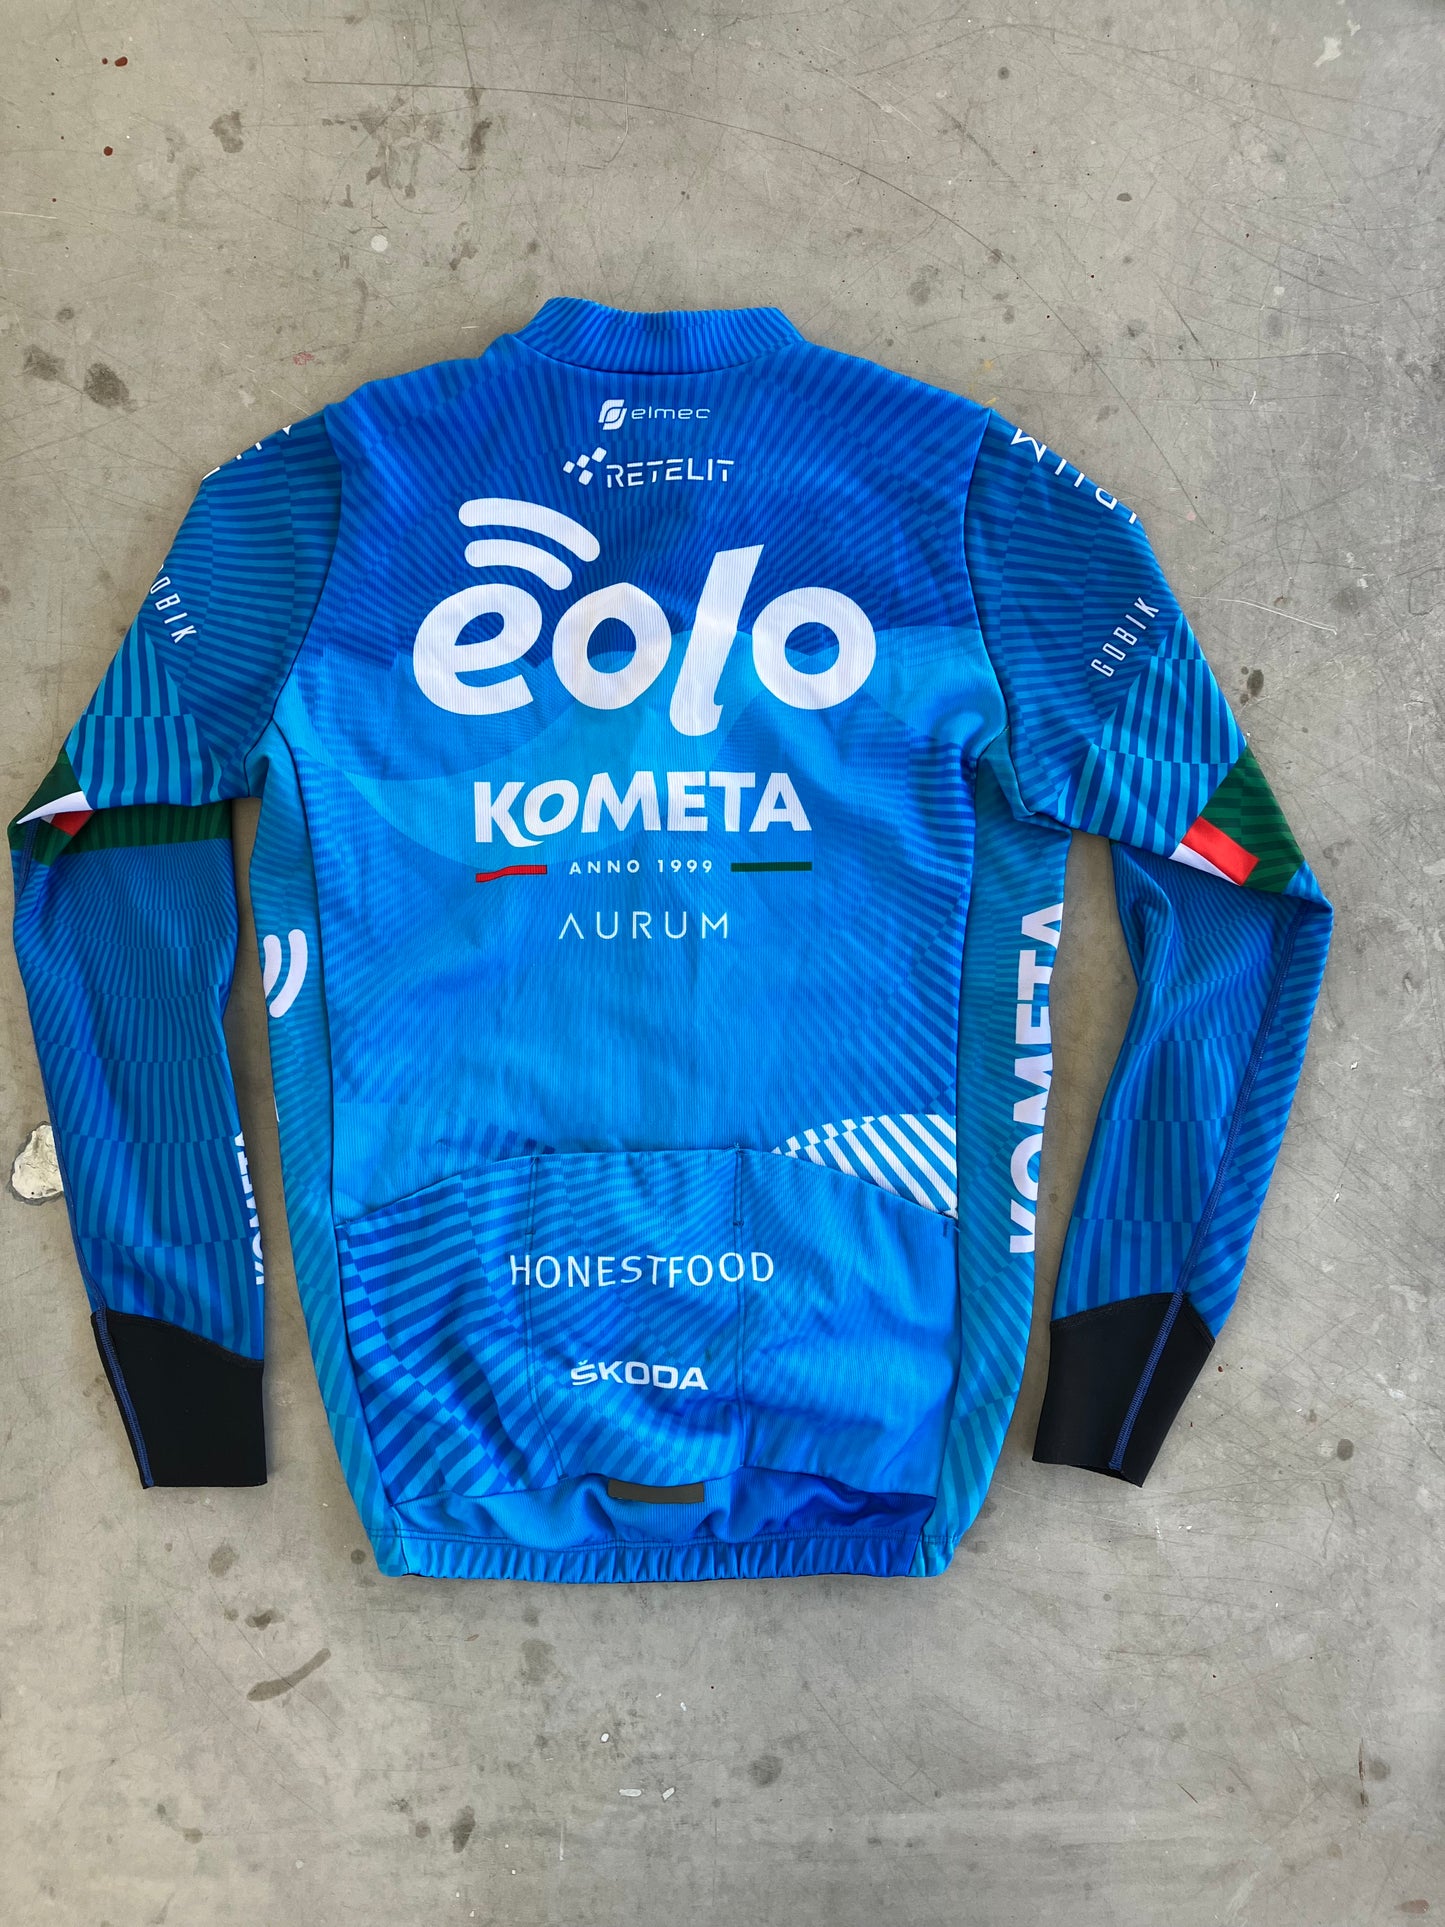 Eolo | Gobik Long Sleeve Thermal Jersey | Blue | XS | Rider-Issued Pro Team Kit